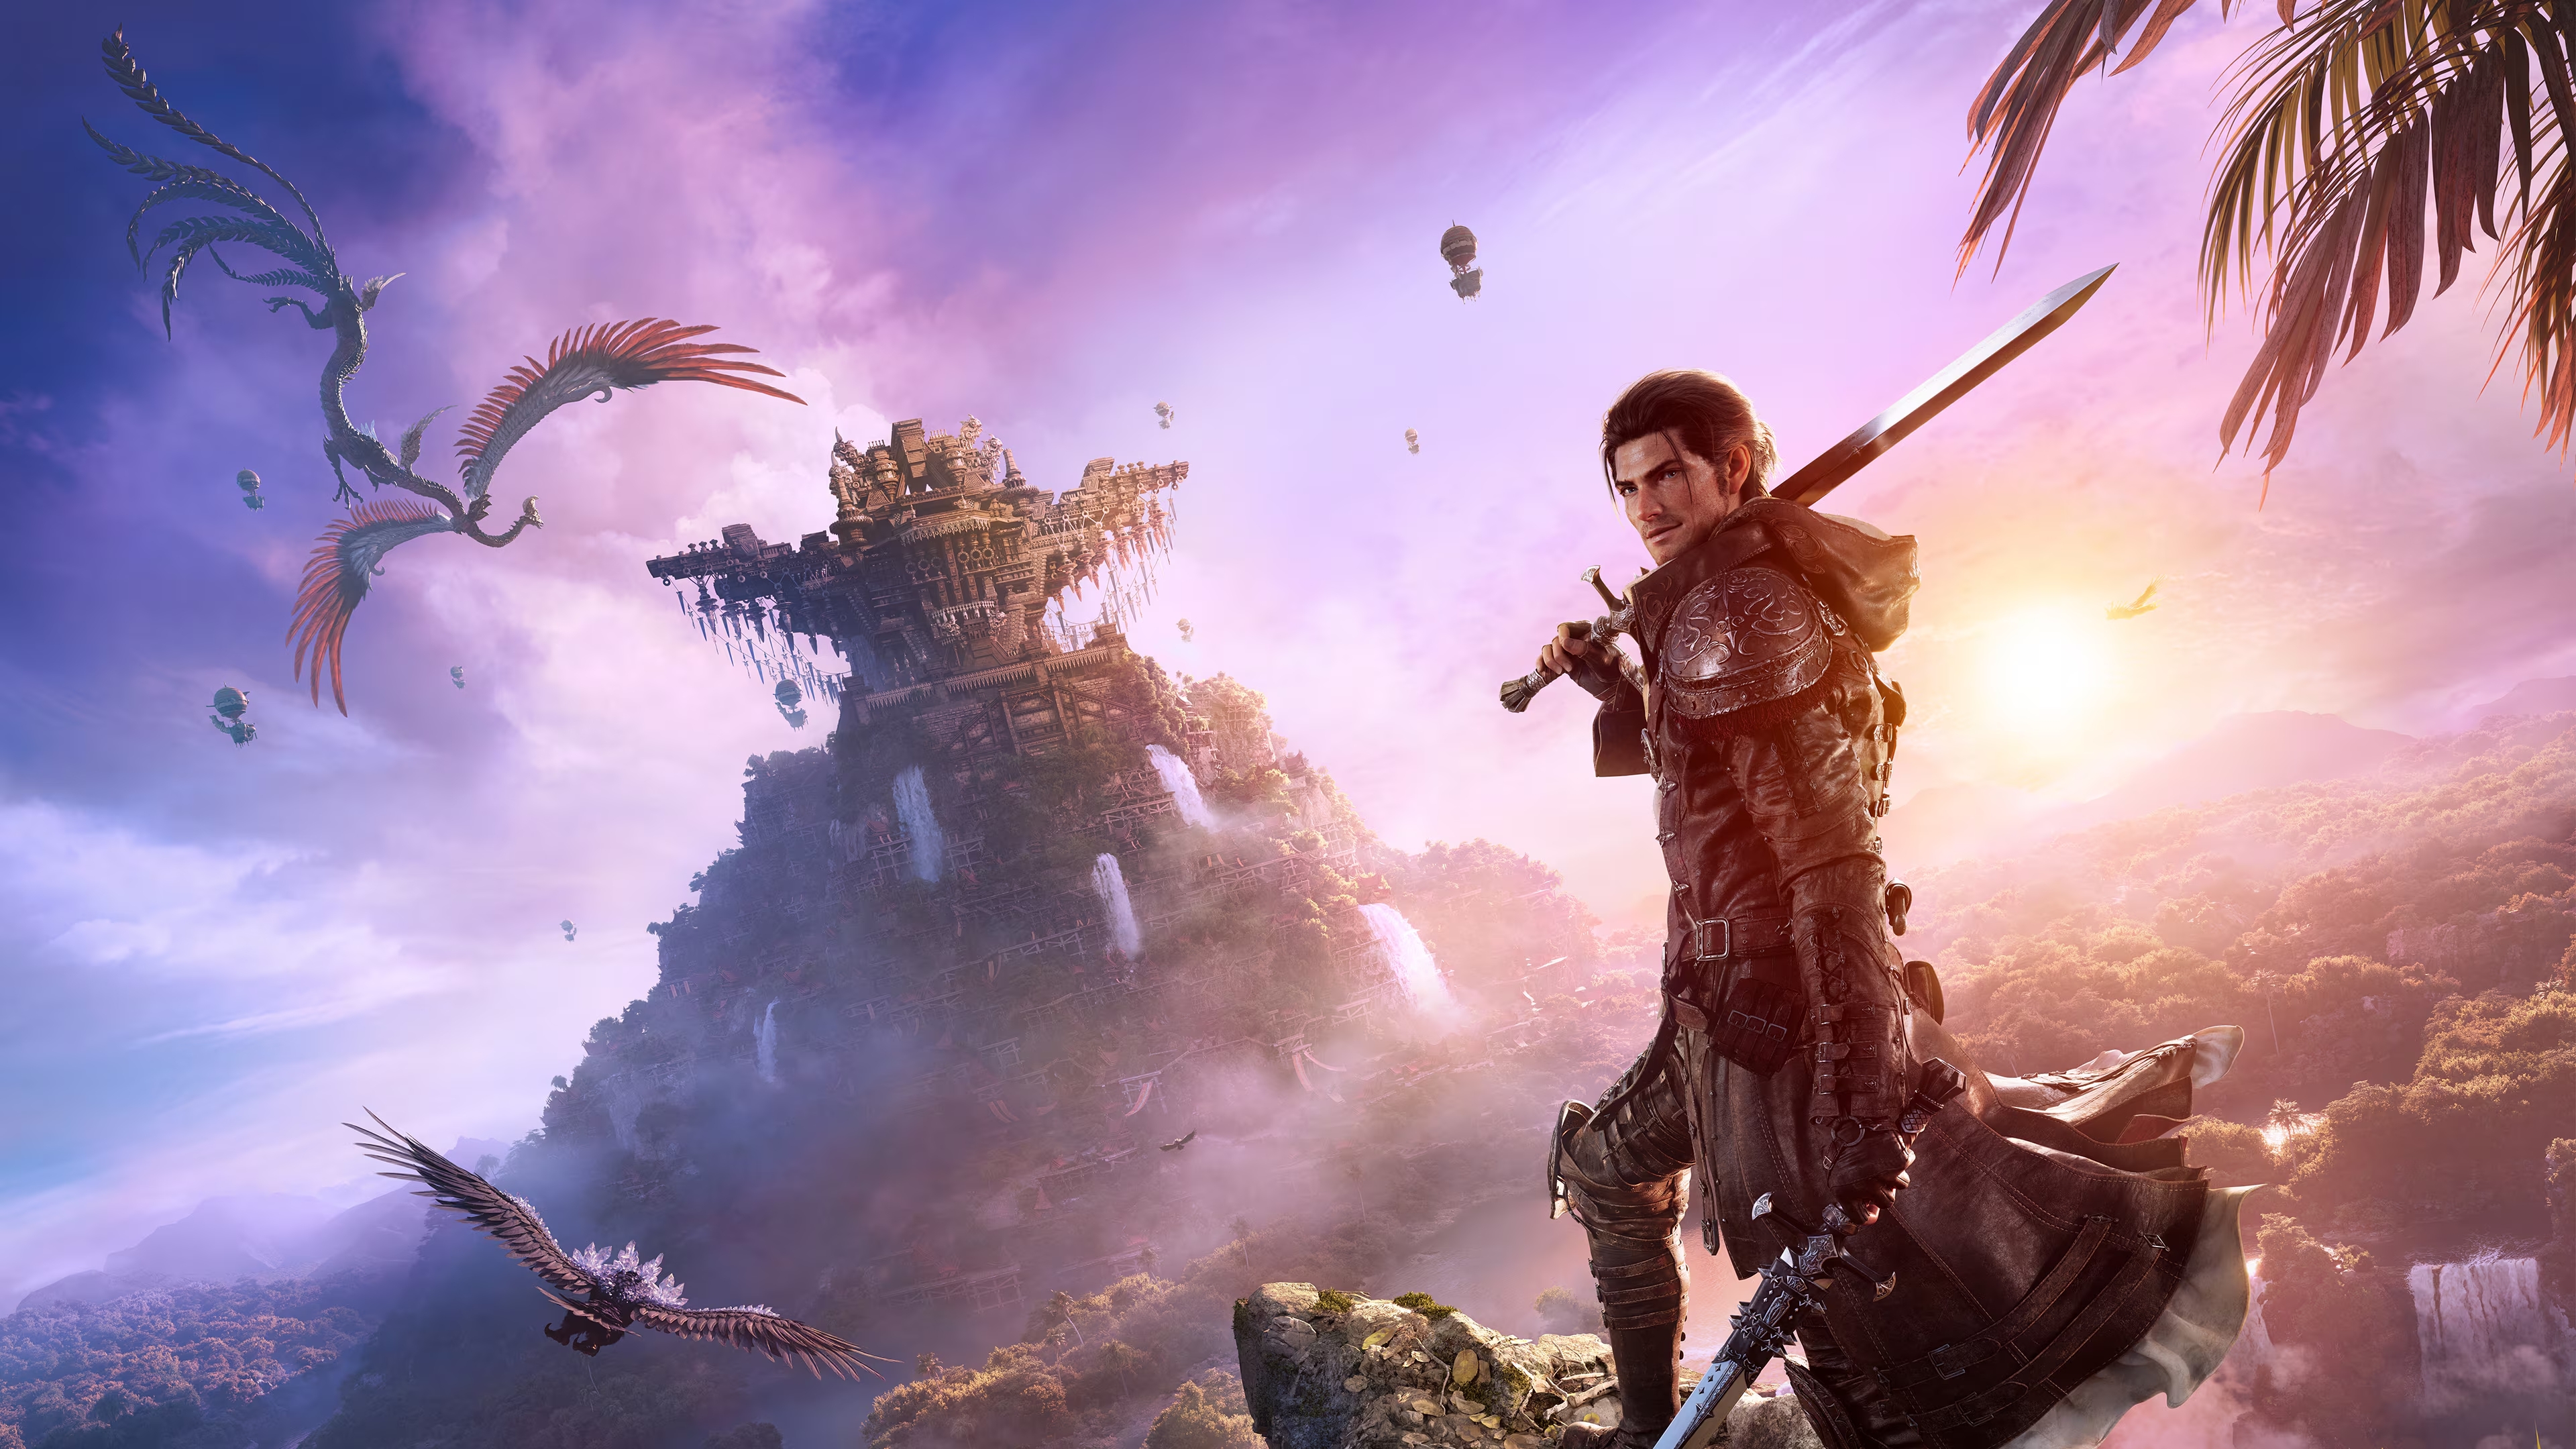 Naoki Yoshida apologised to fans for the problems in the Final Fantasy XIV expansion: Downtrail expansion in early access 